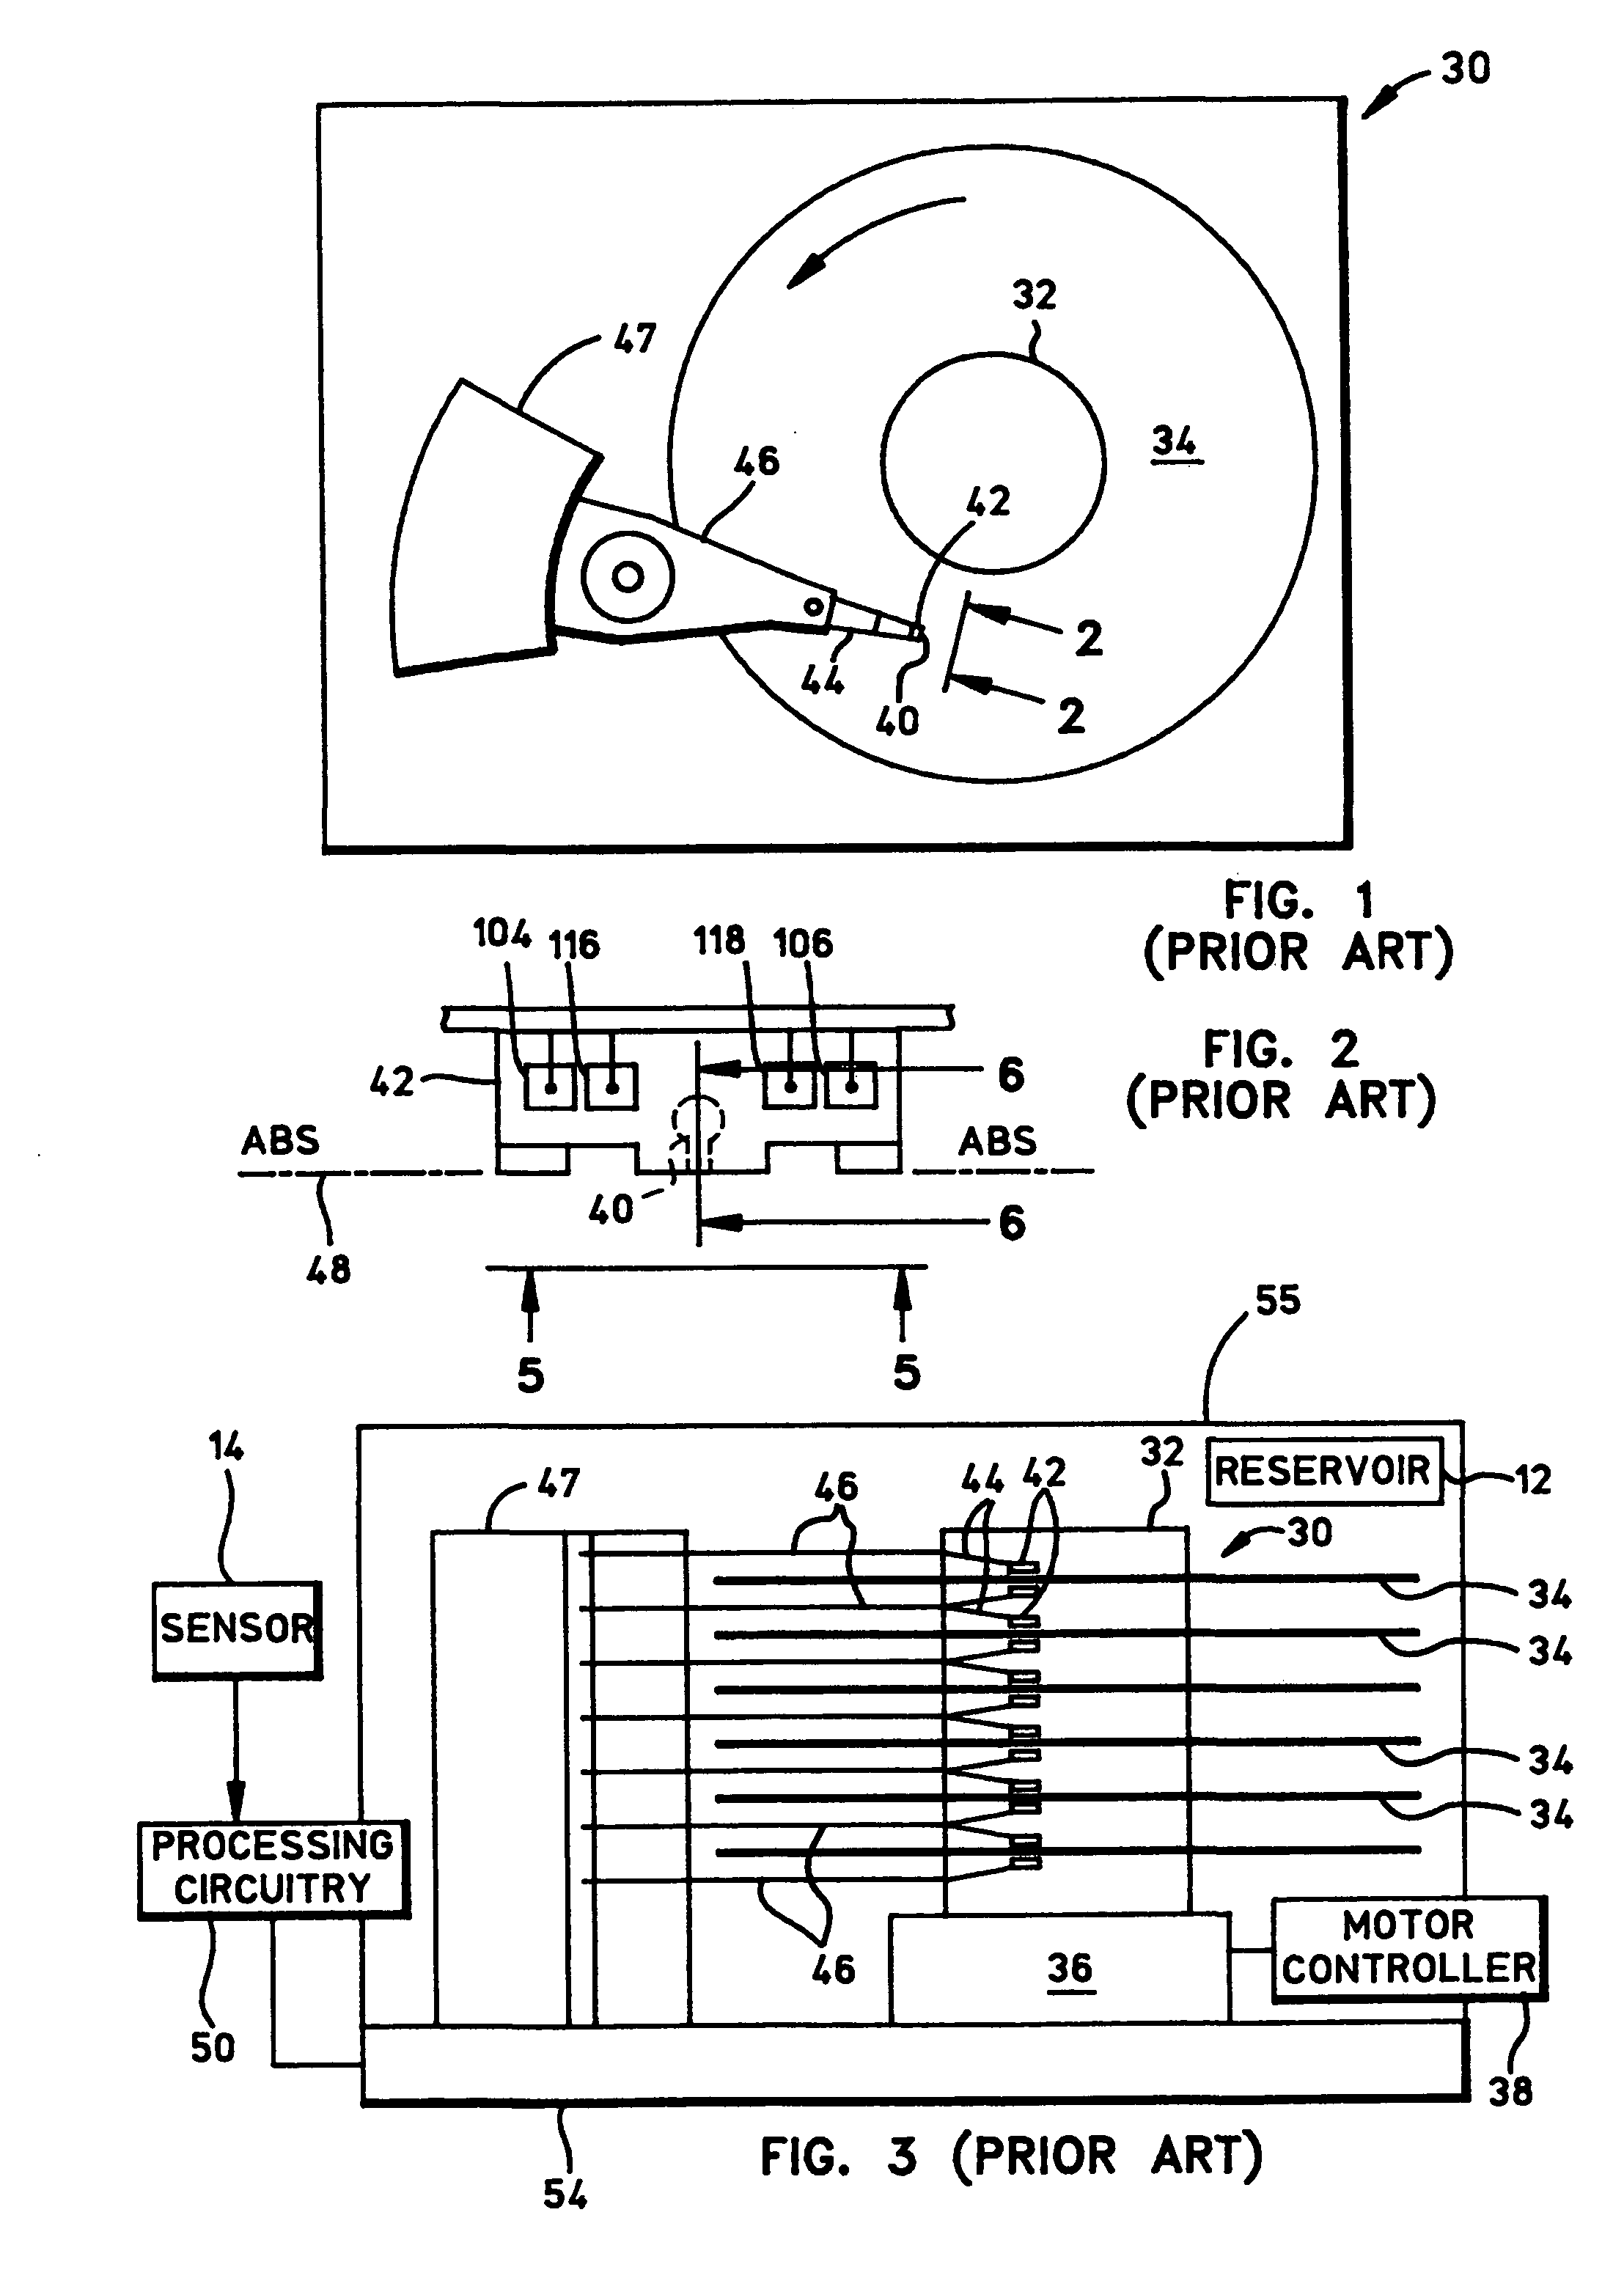 Self-pinned spin valve sensor with stress modification layers for reducing the likelihood of amplitude flip